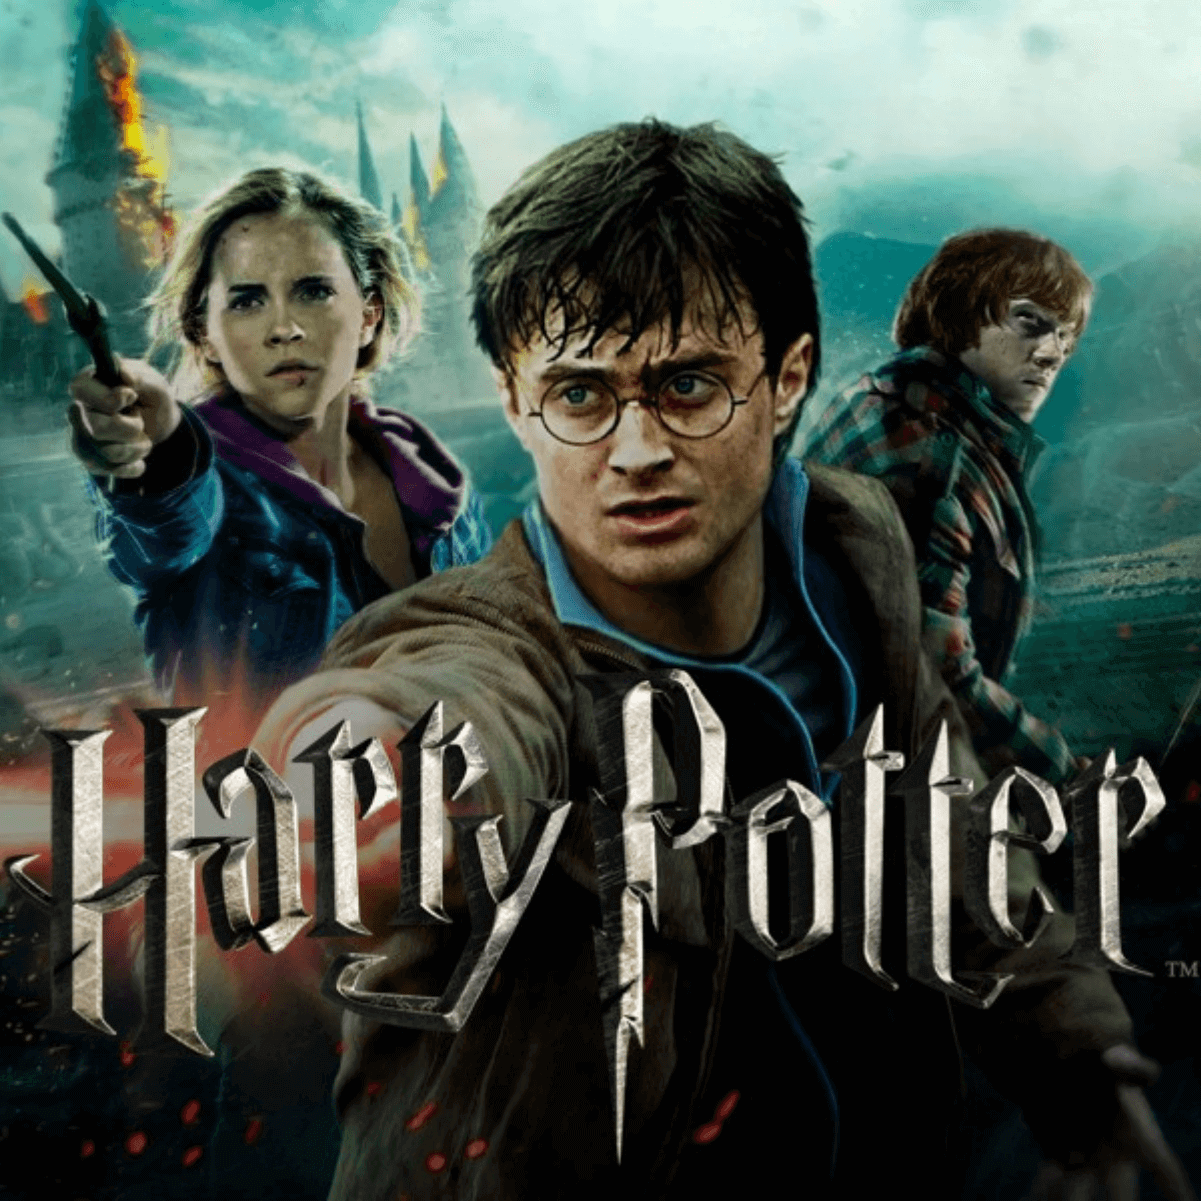 Watch harry potter 2 movies online free